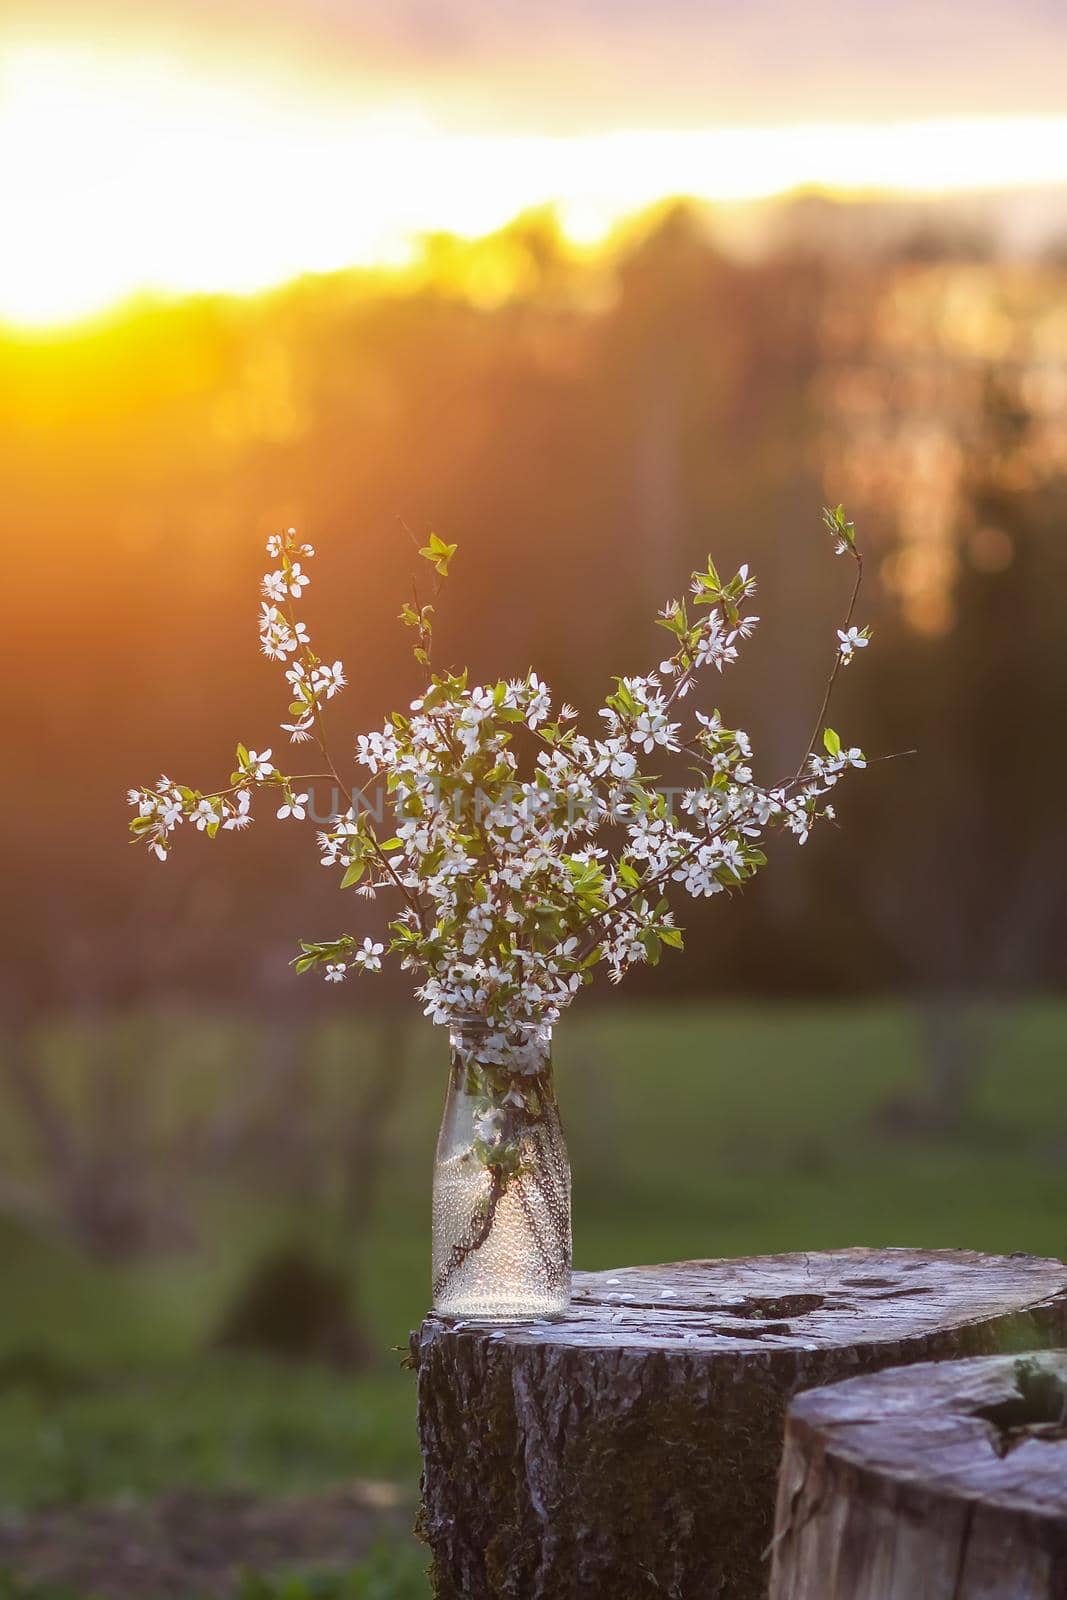 Spring cherry bouquet in a glass vase outdoors. by nightlyviolet